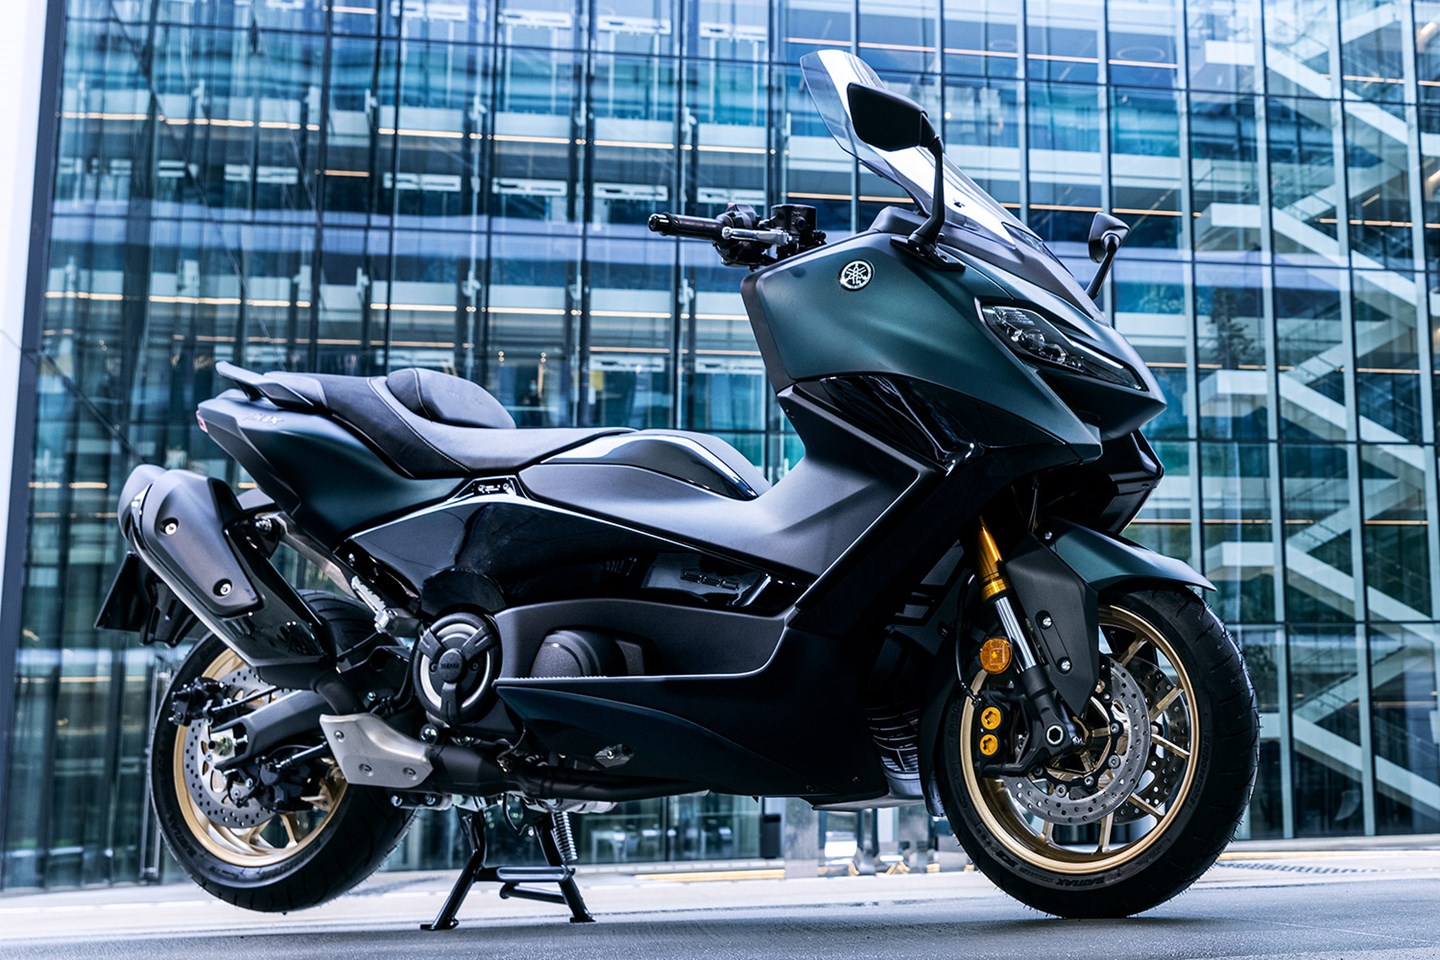 The Ultimate Yamaha T Max Tech Max Review: The best scooter in